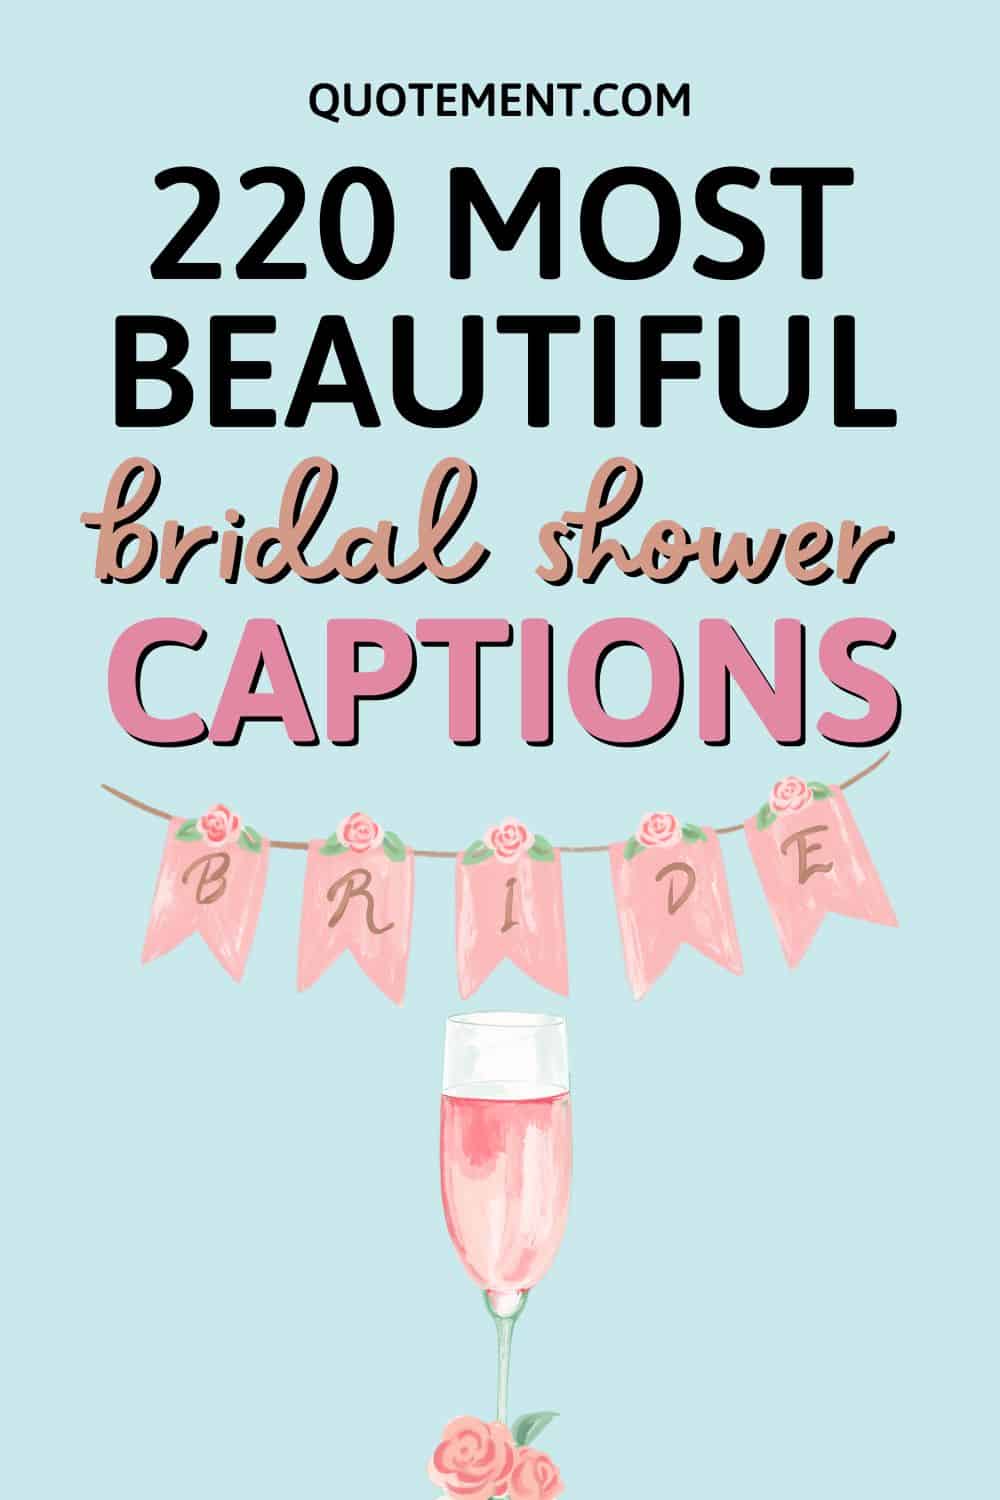 220 Most Beautiful Bridal Shower Captions For Instagram